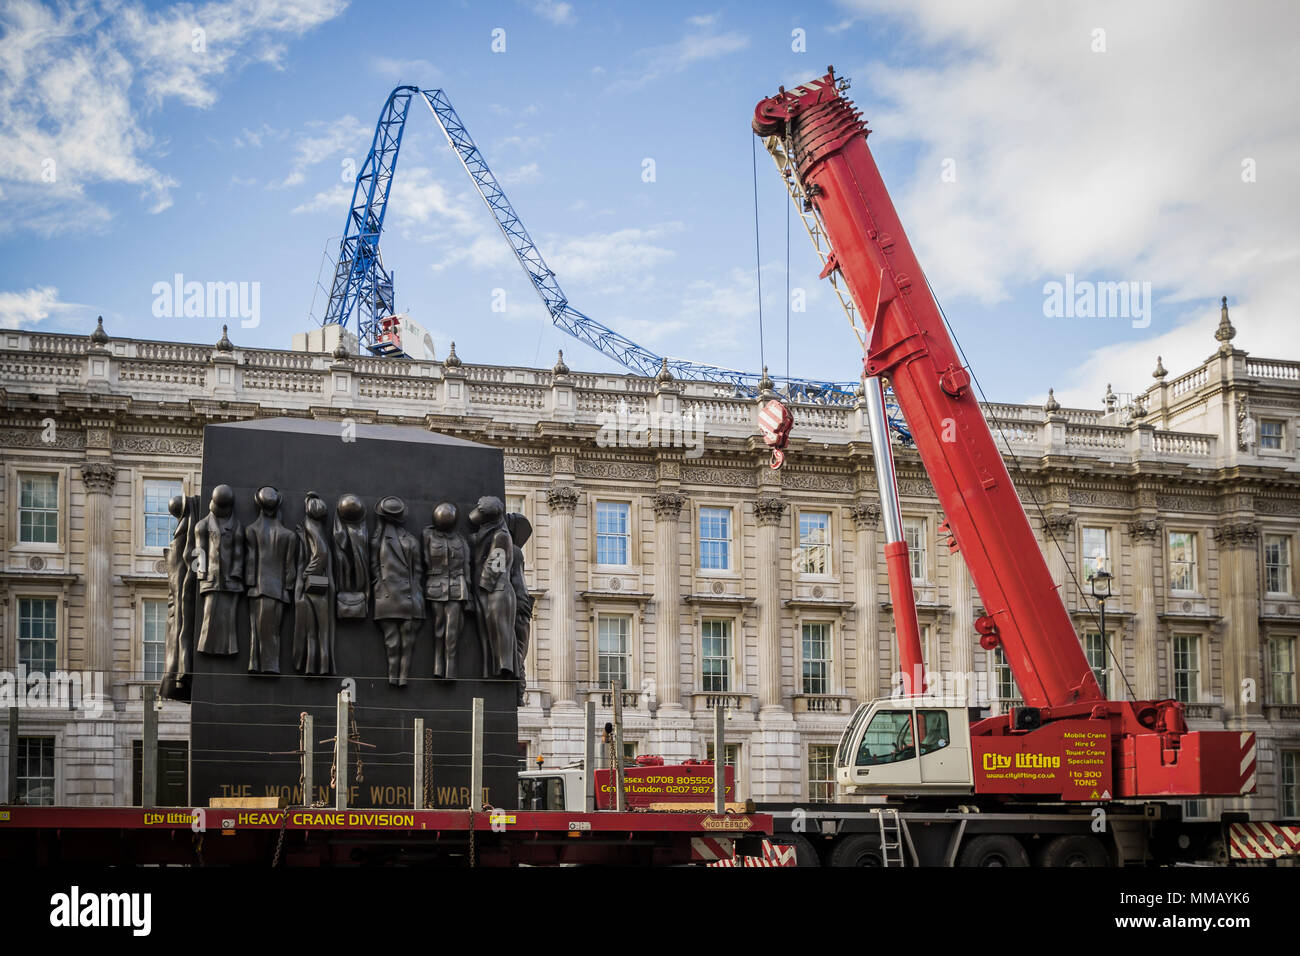 Storm damage: Buckled crane crashed on Cabinet Office roof in London, UK. Stock Photo